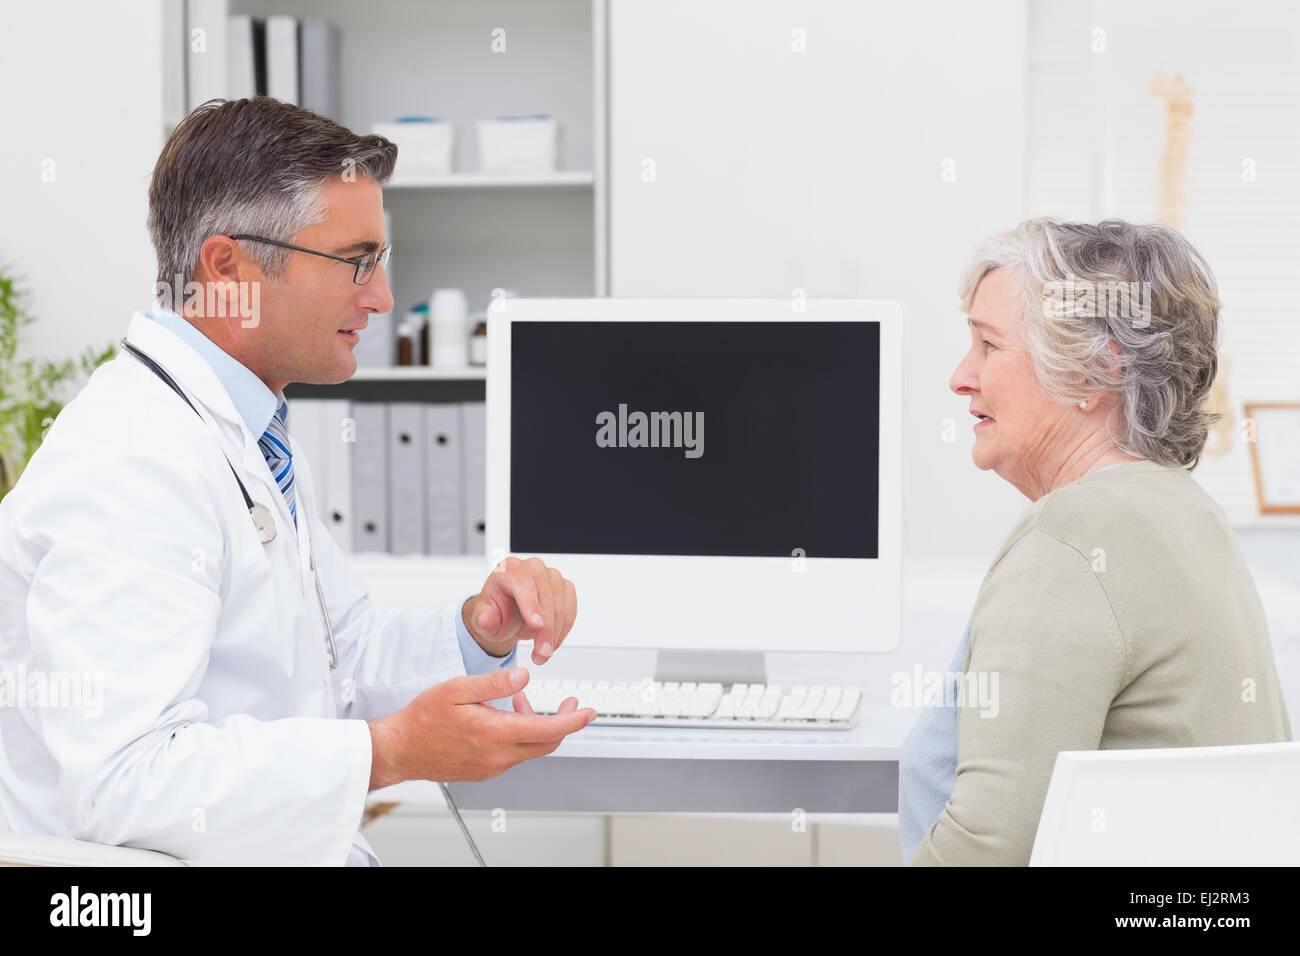 Male doctor conversing with senior patient at table Stock Photo